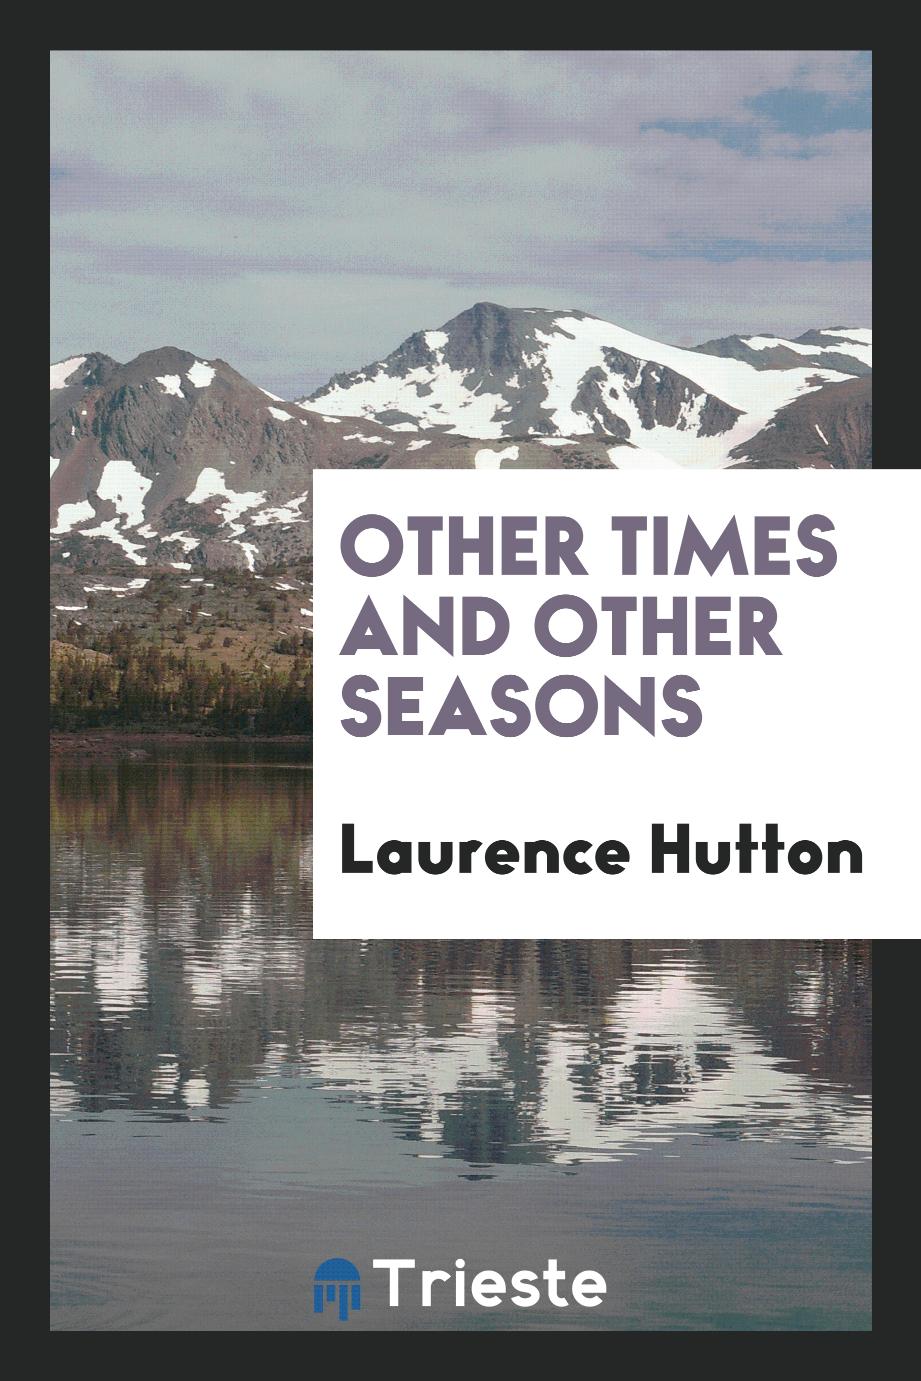 Other times and other seasons